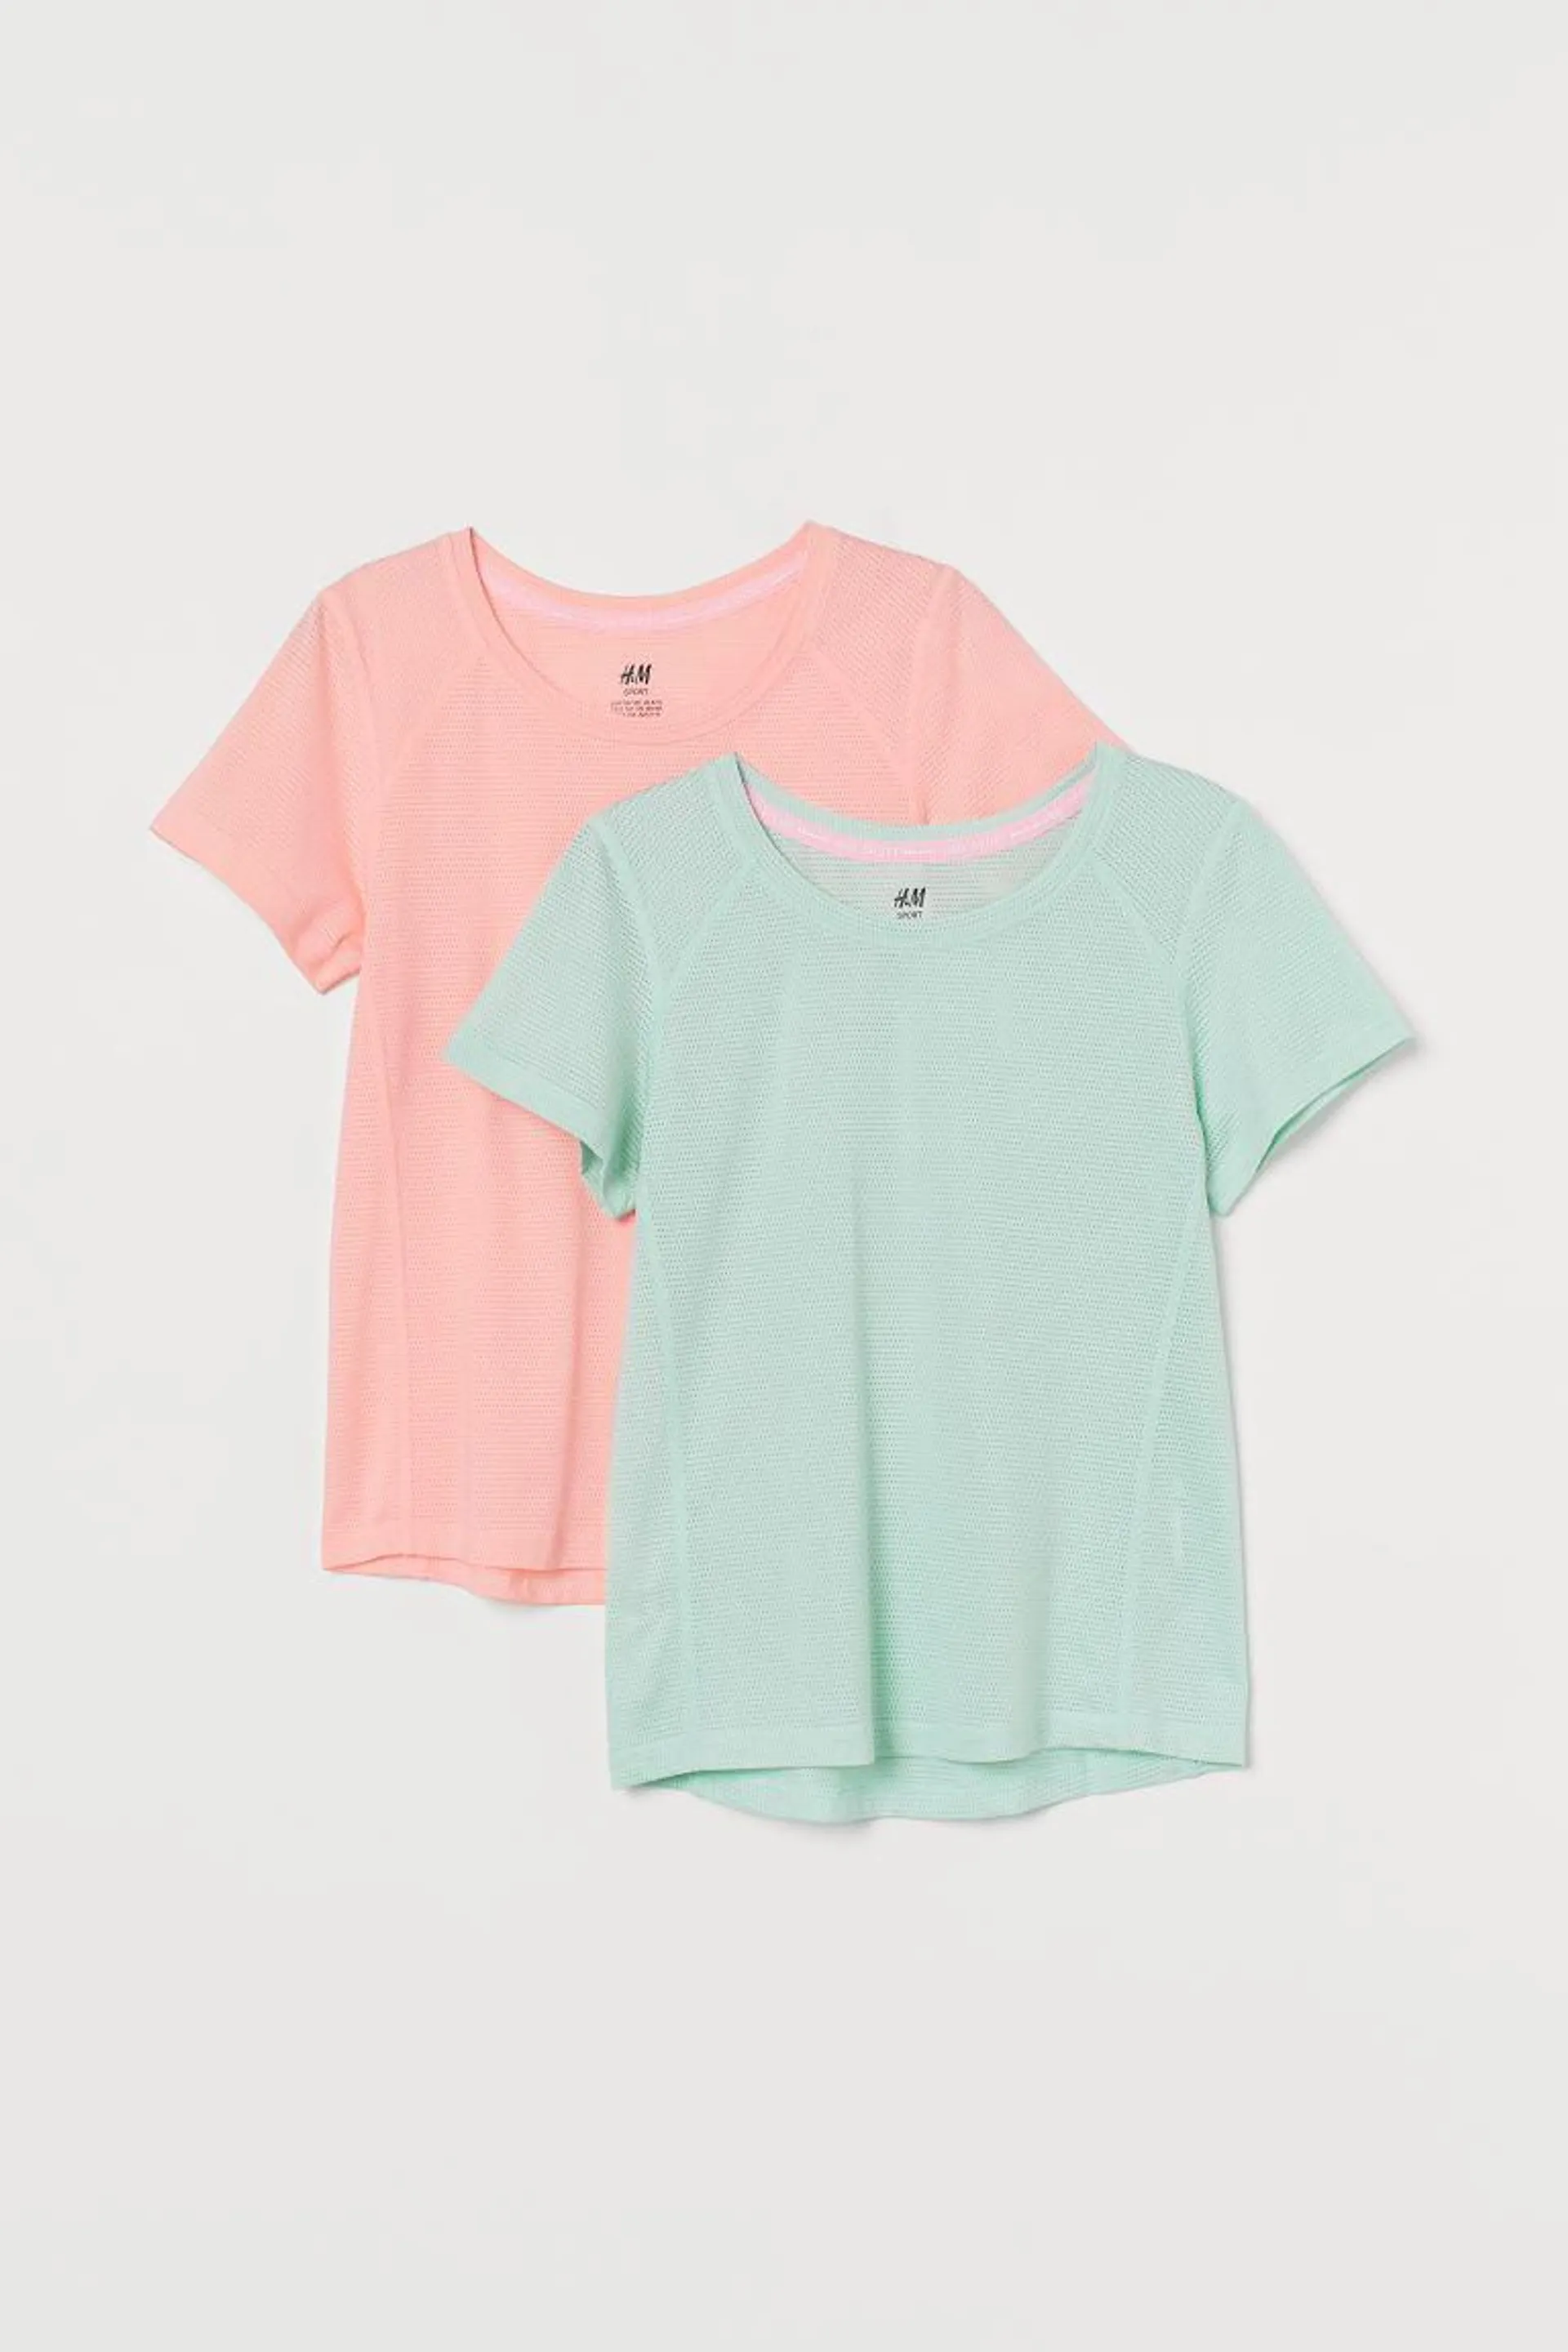 2-pack sports tops